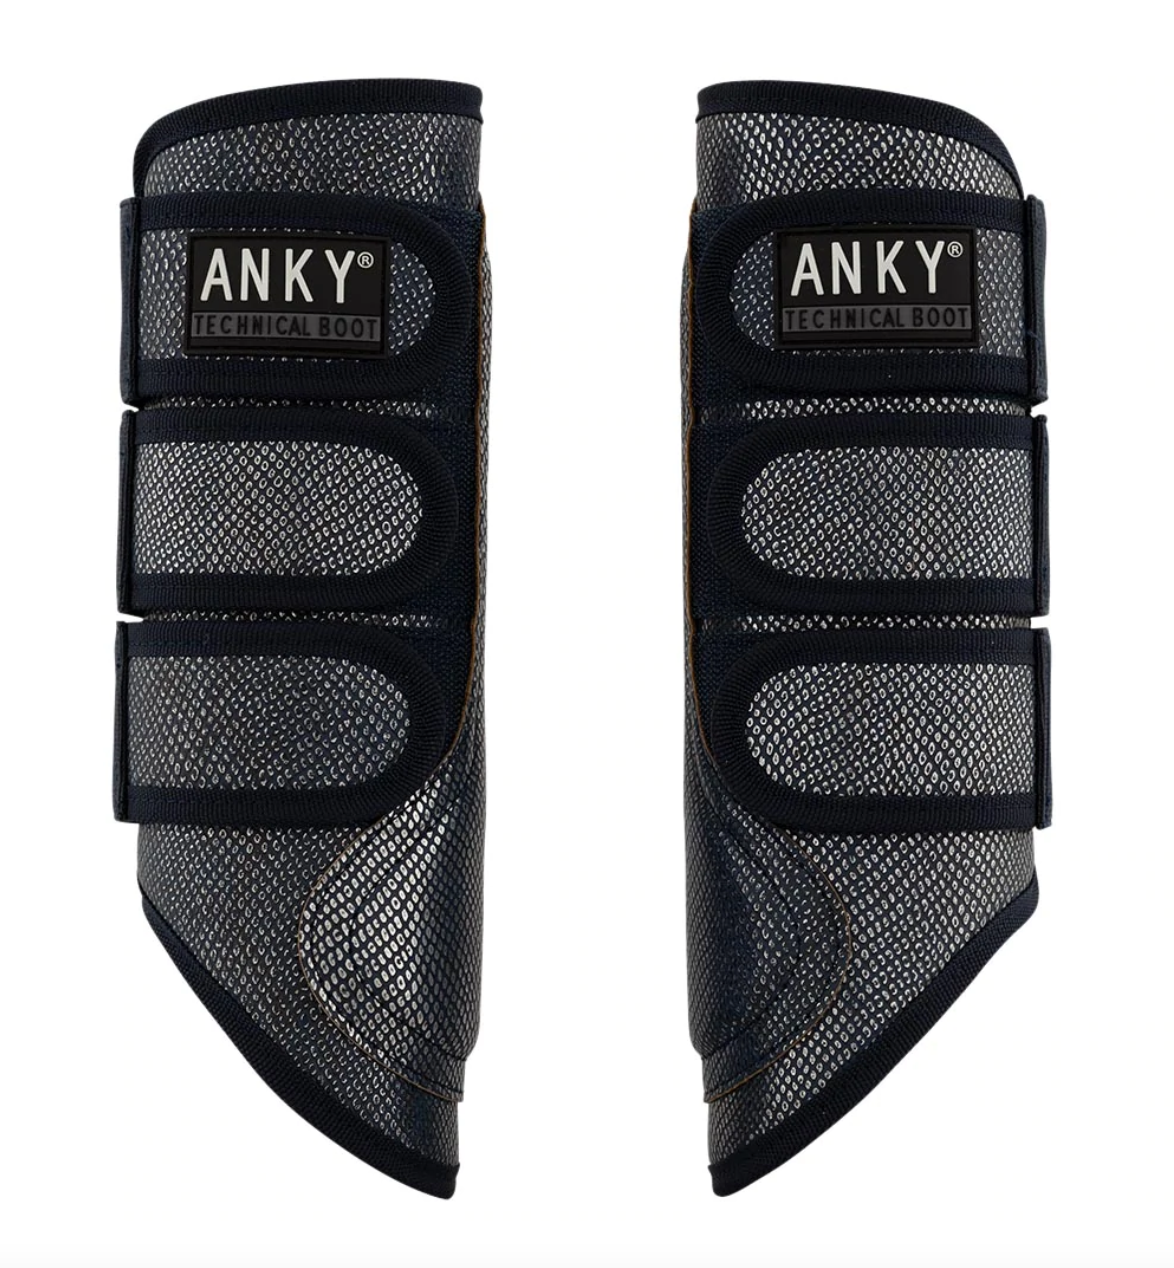 ANKY SS22 Proficient Boots